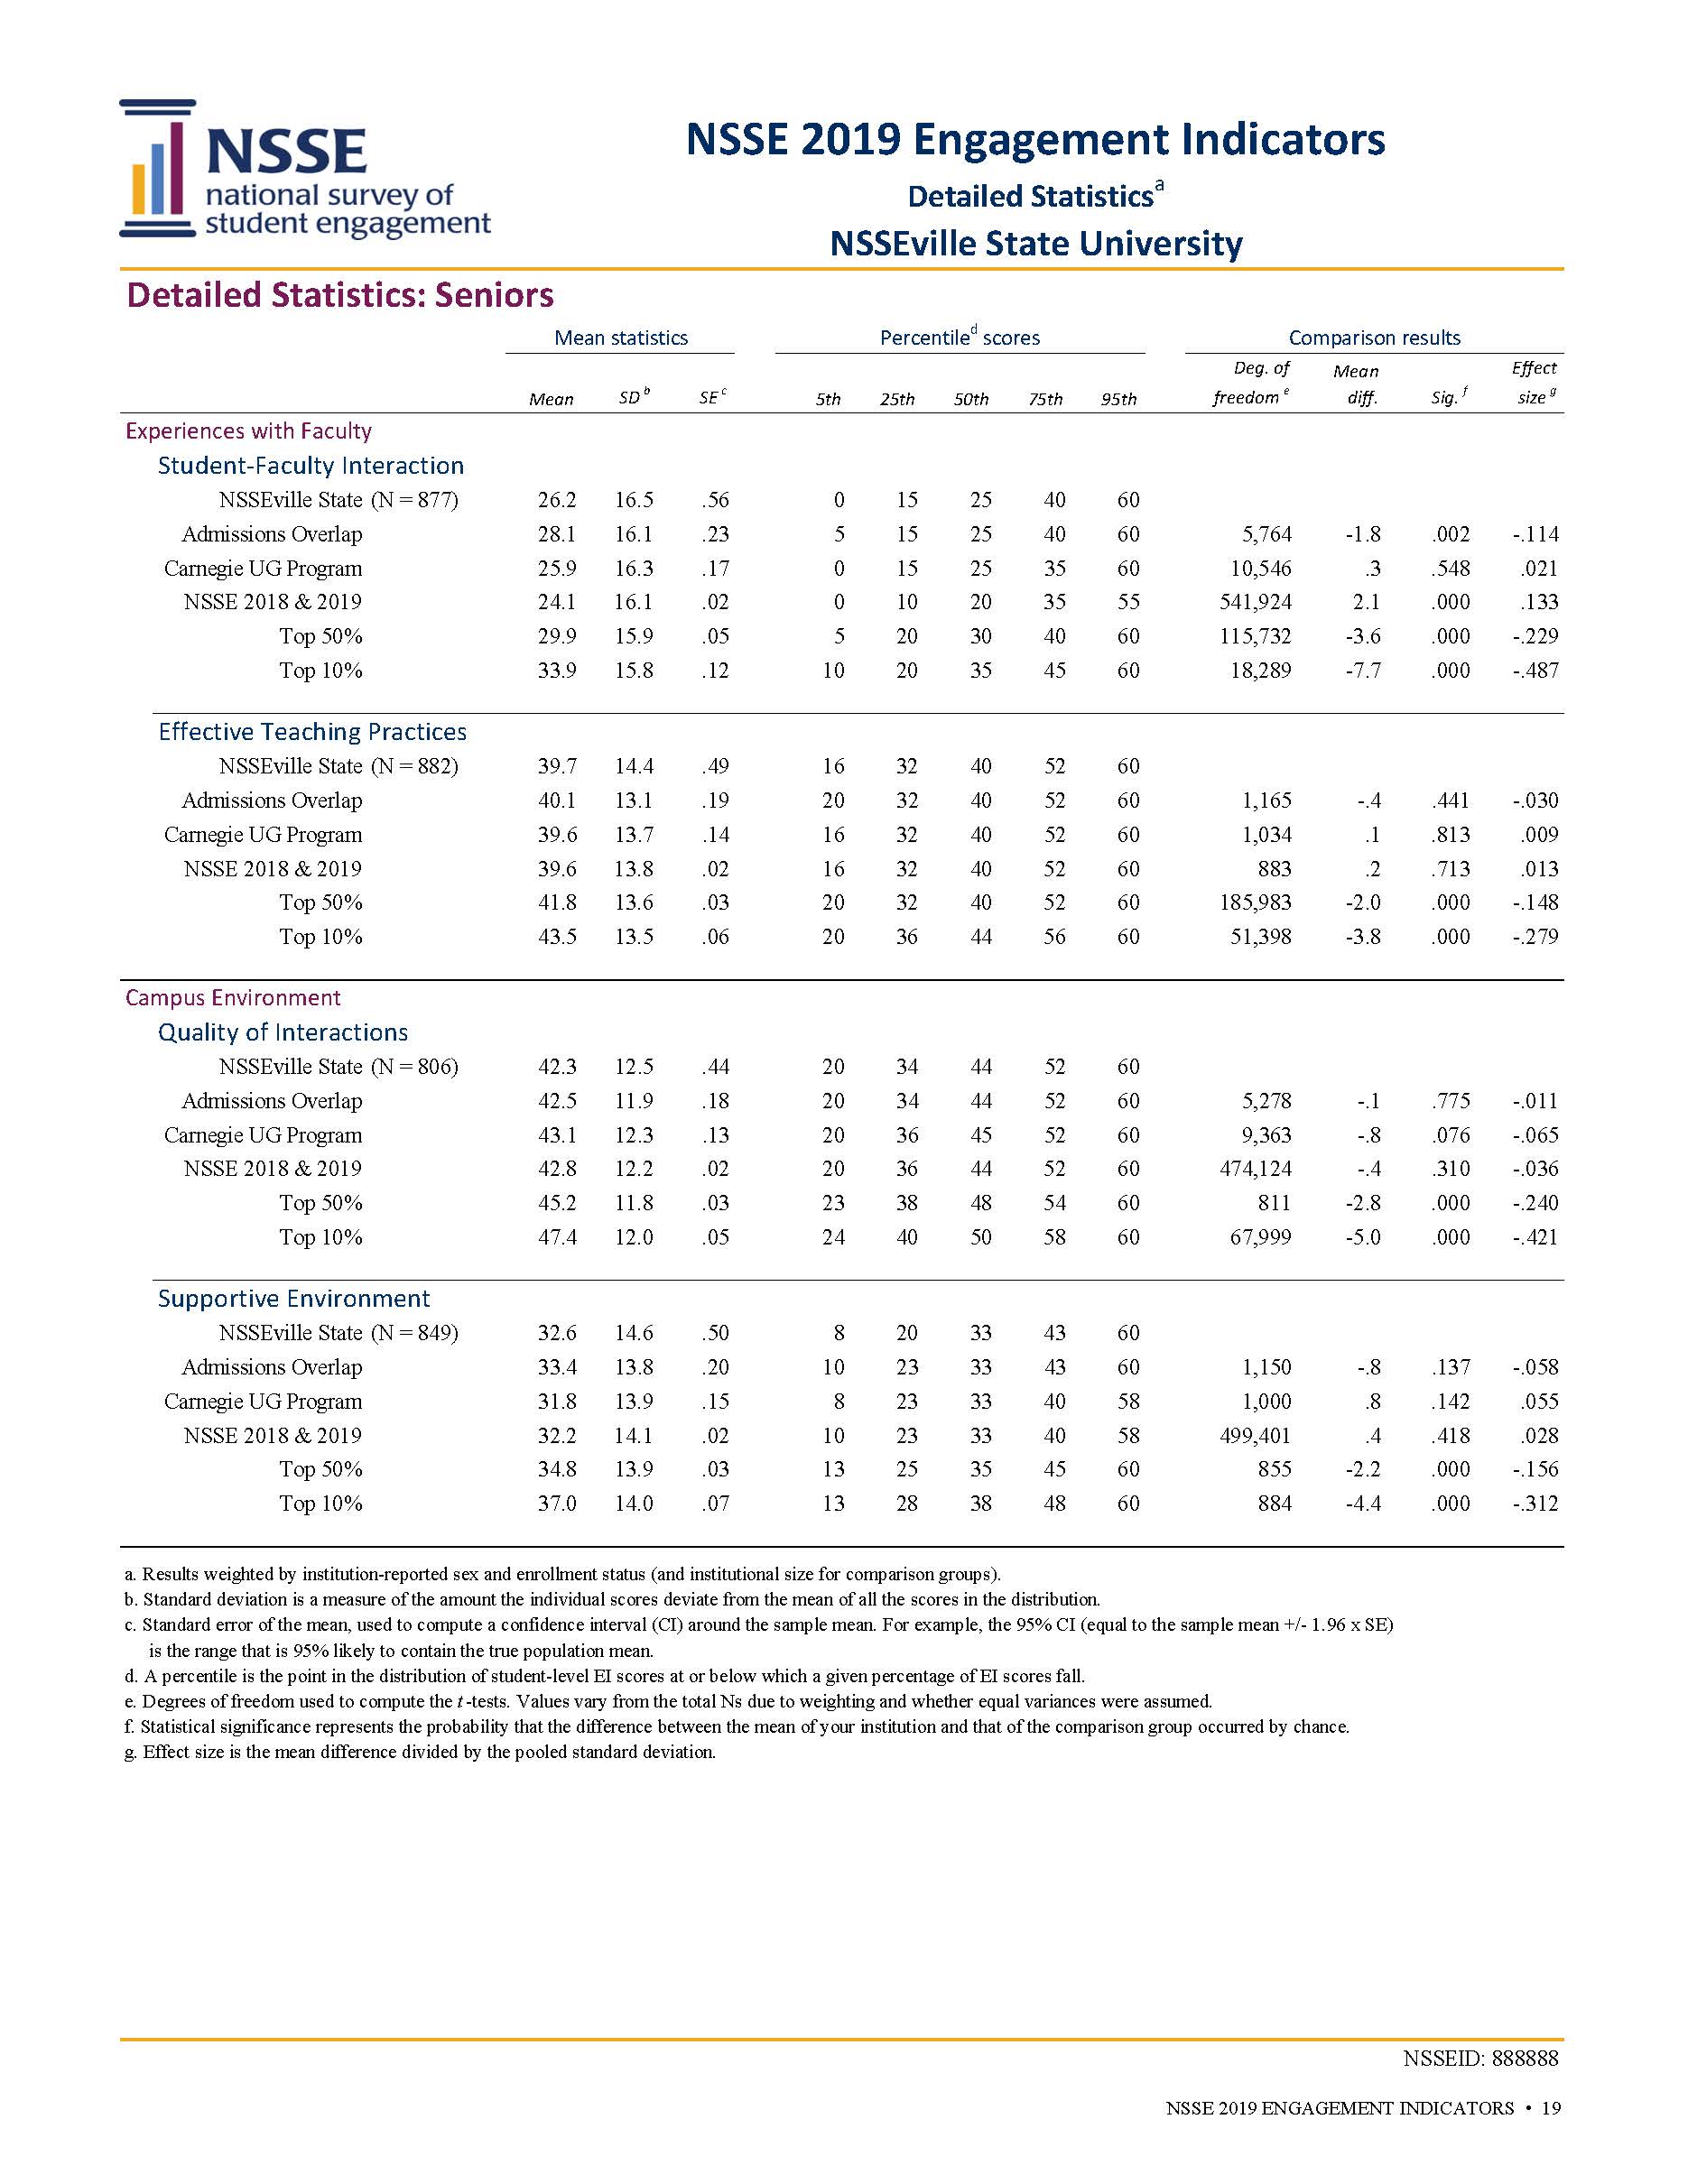 Sample Report: page 19 of NSSE Engagement Indicators